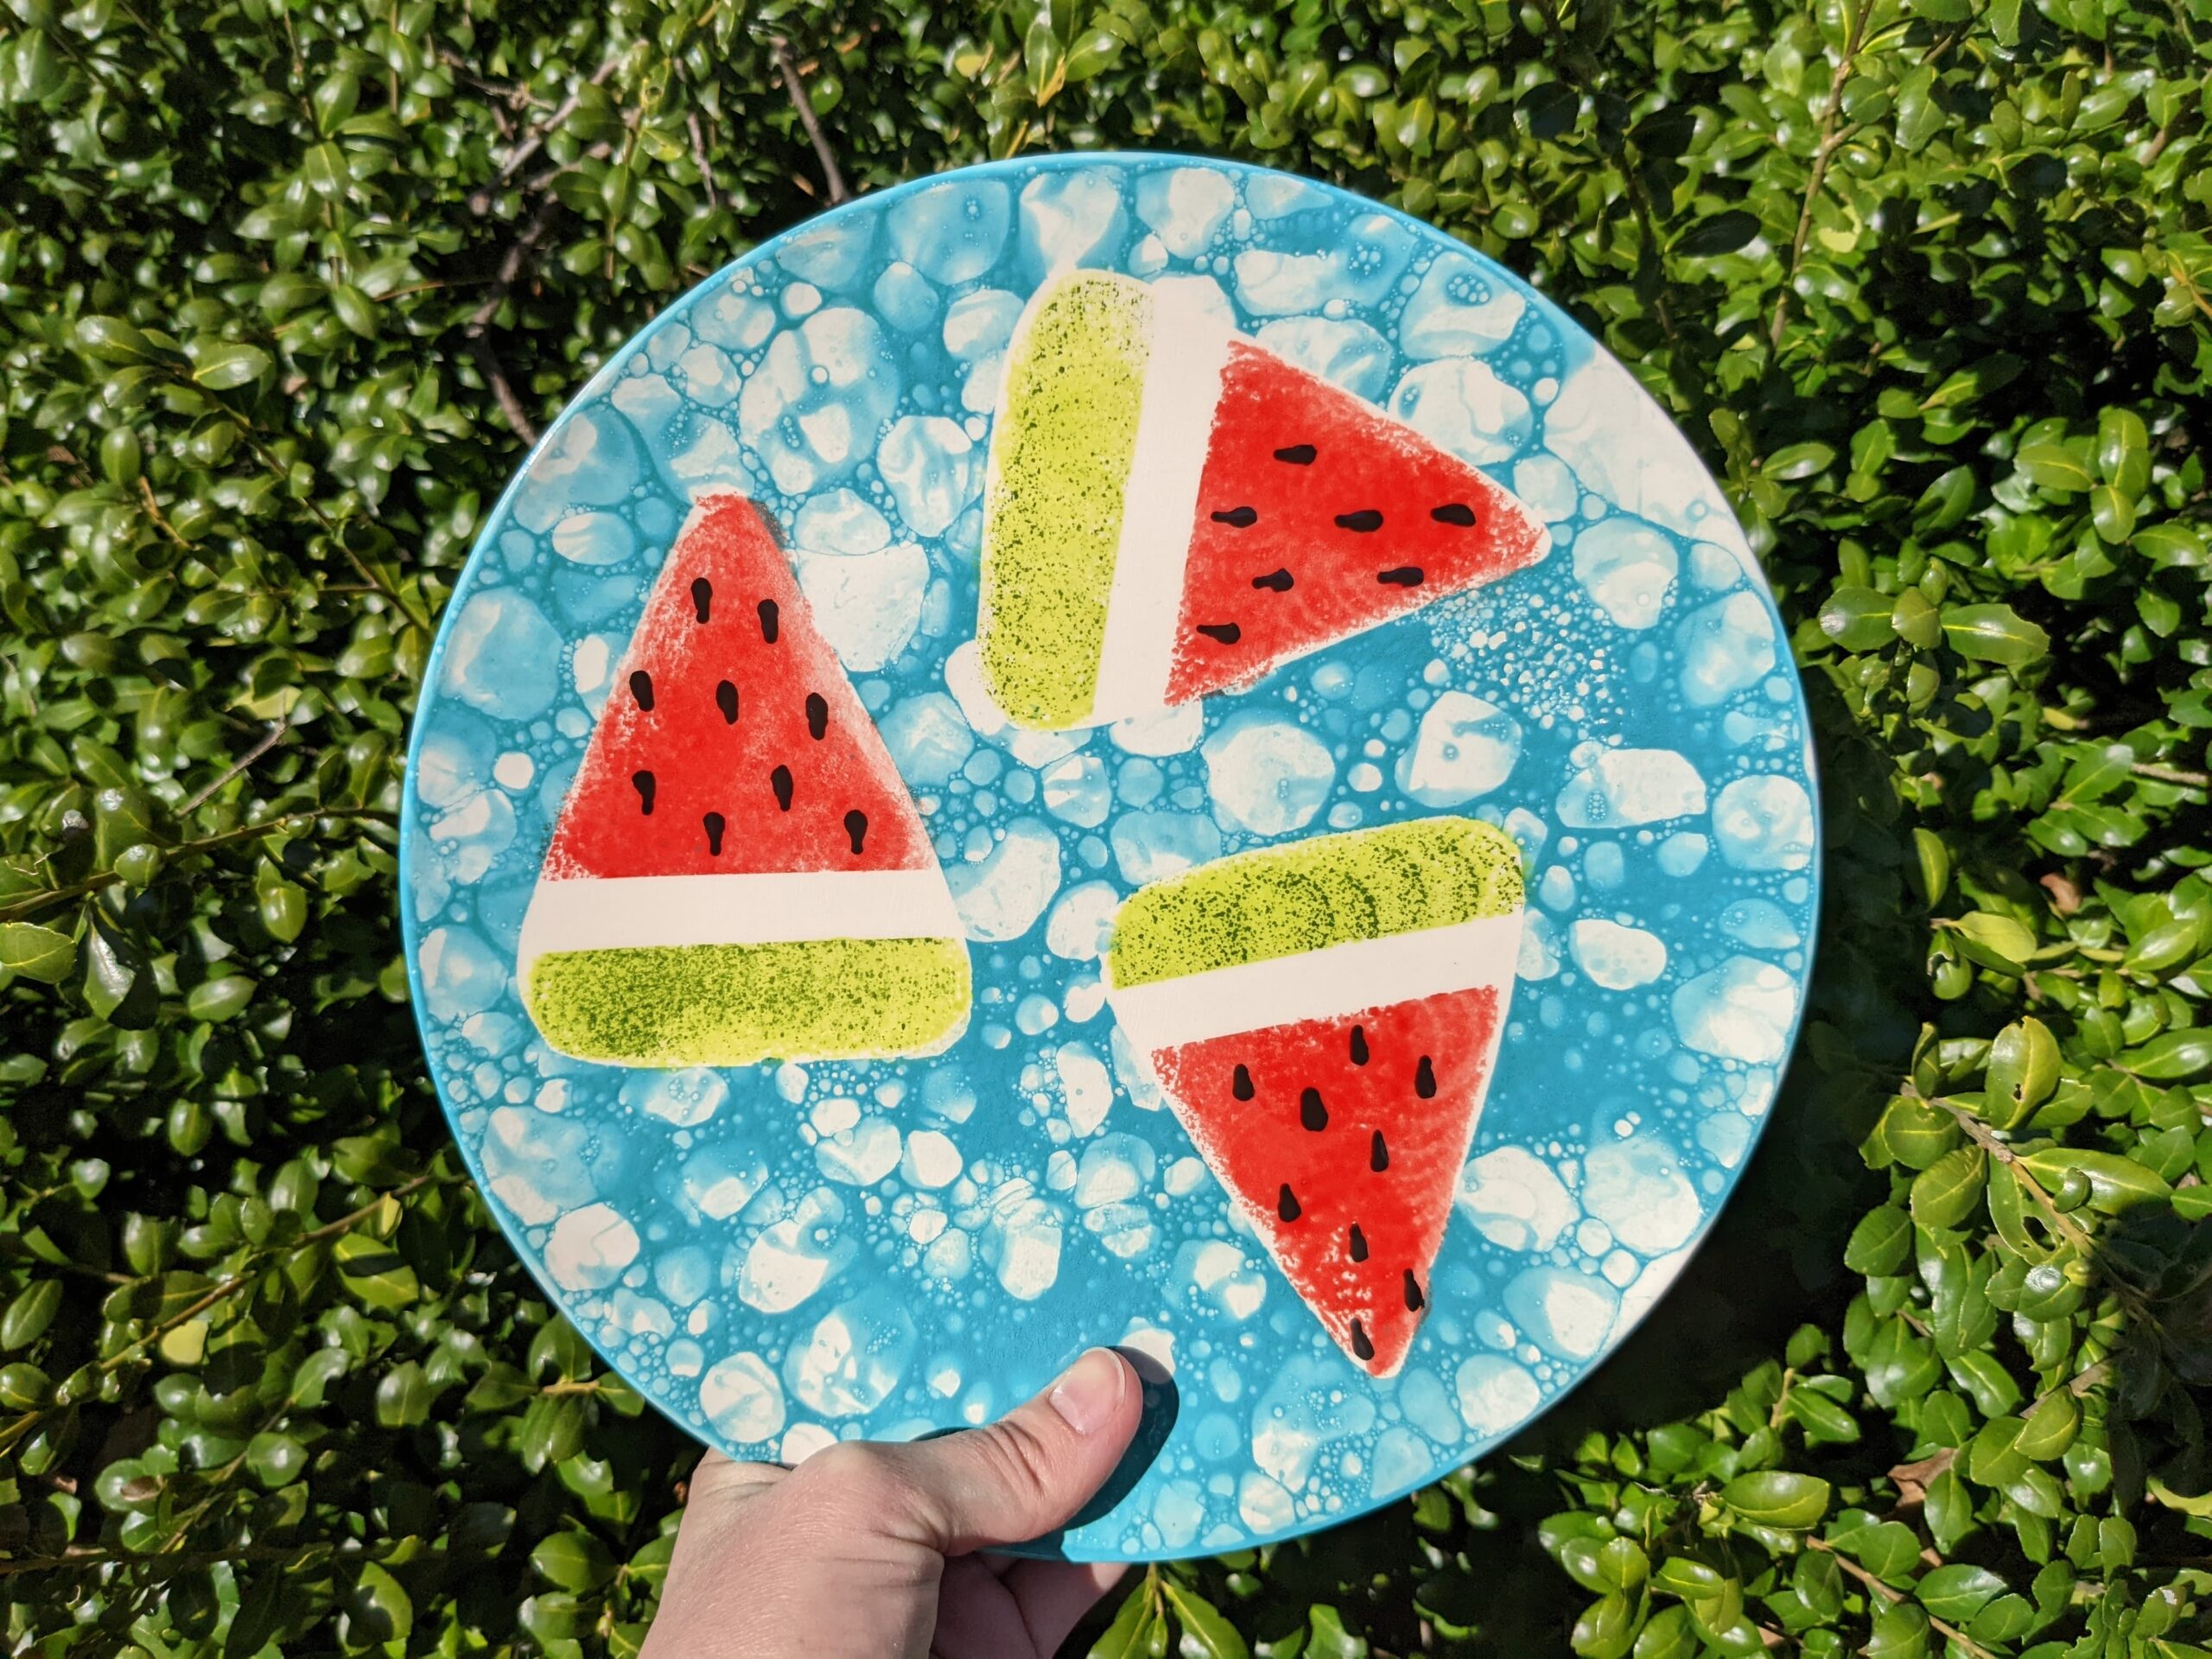 A paper plate with watermelon slices on it